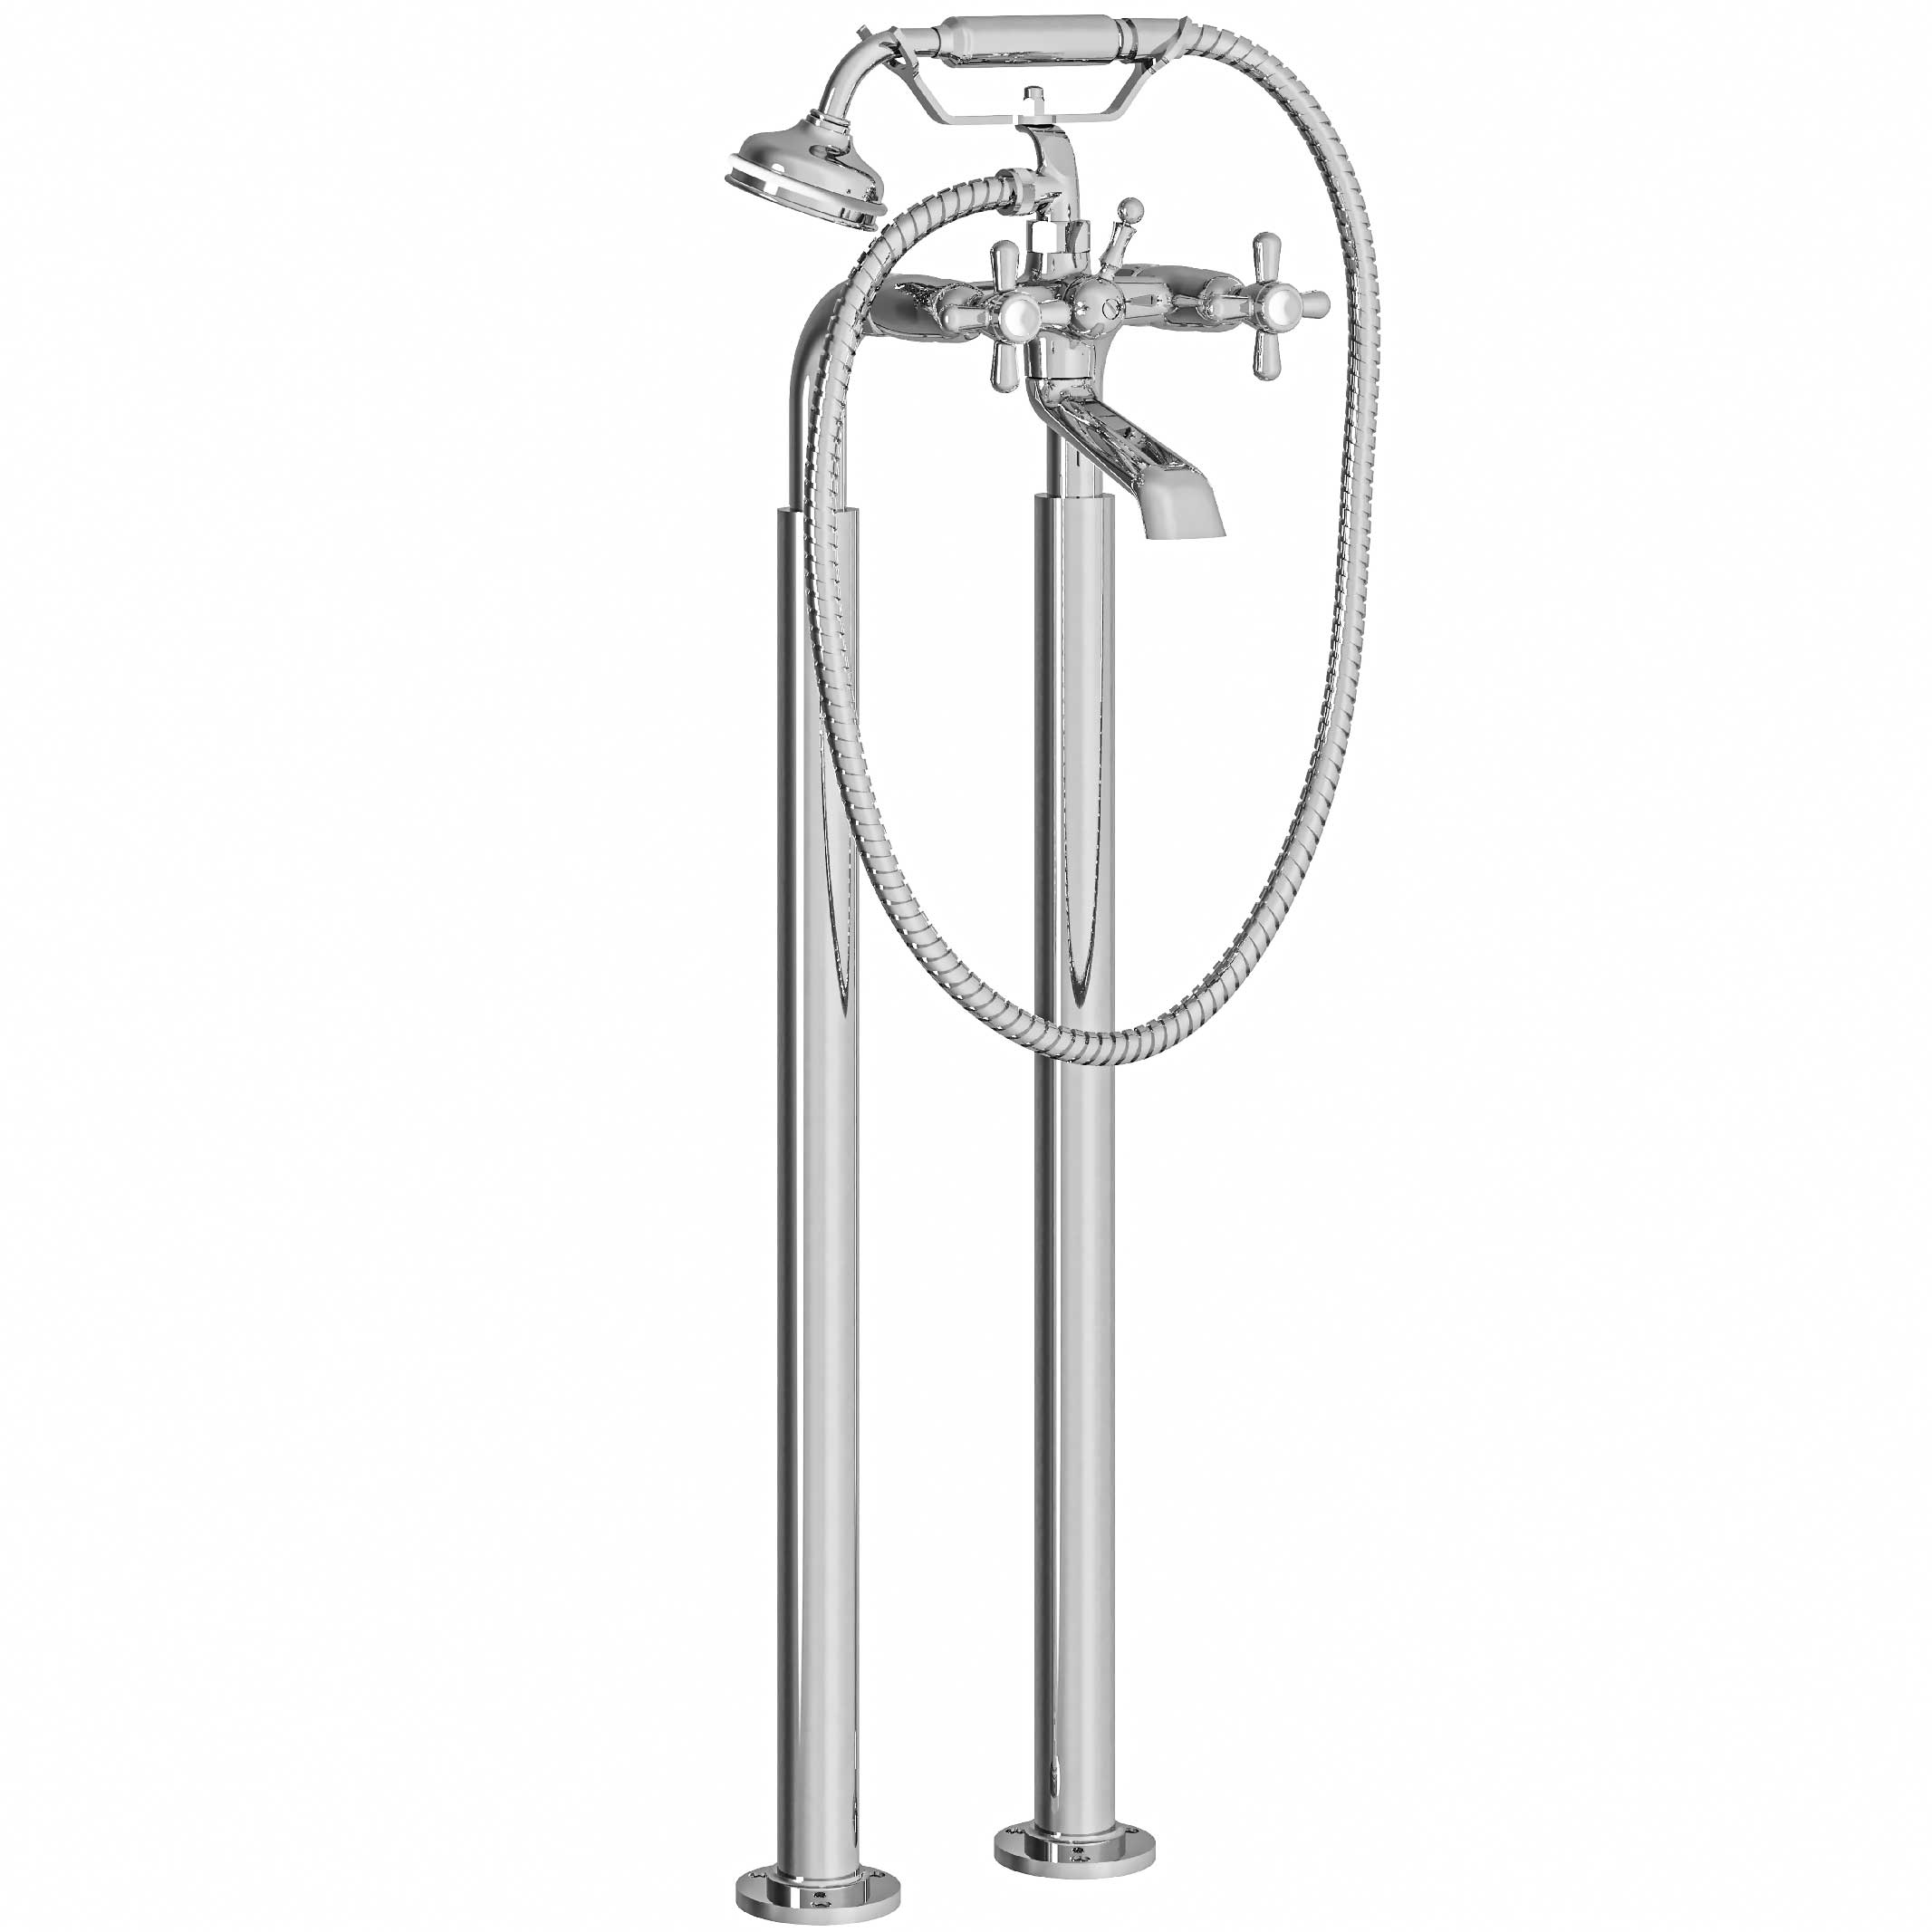 M40-3309 Floor mounted bath and shower mixer